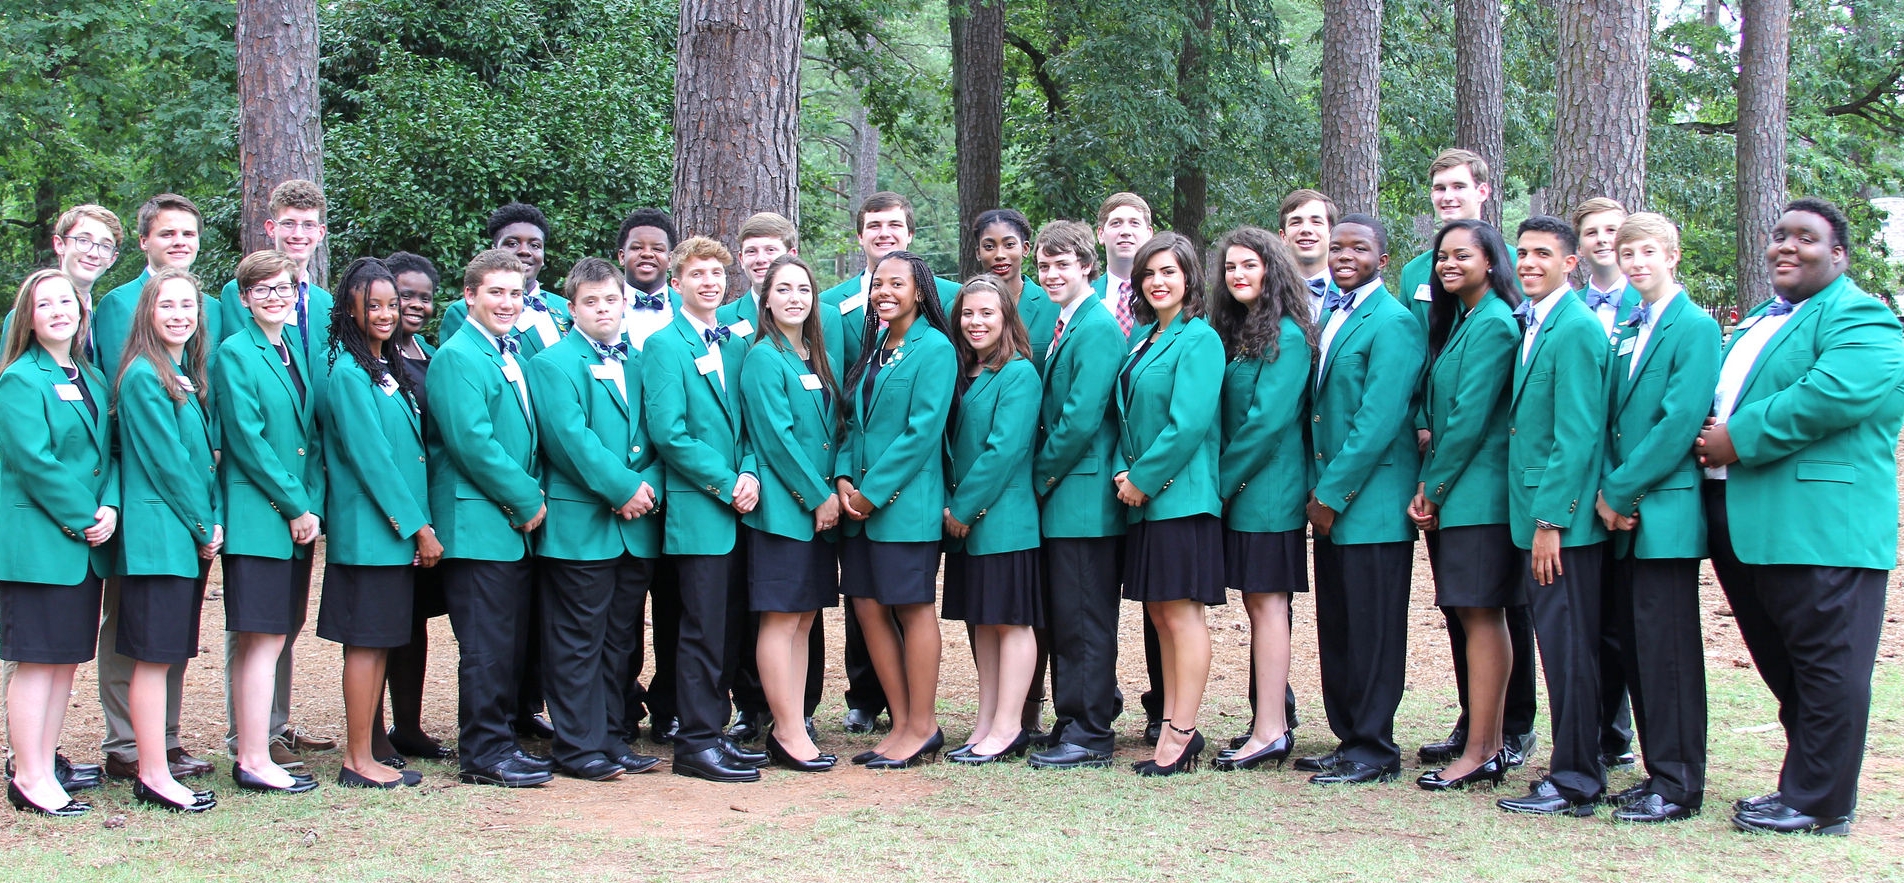 Group photo of 4-H'ers in matching green 4-H blazers